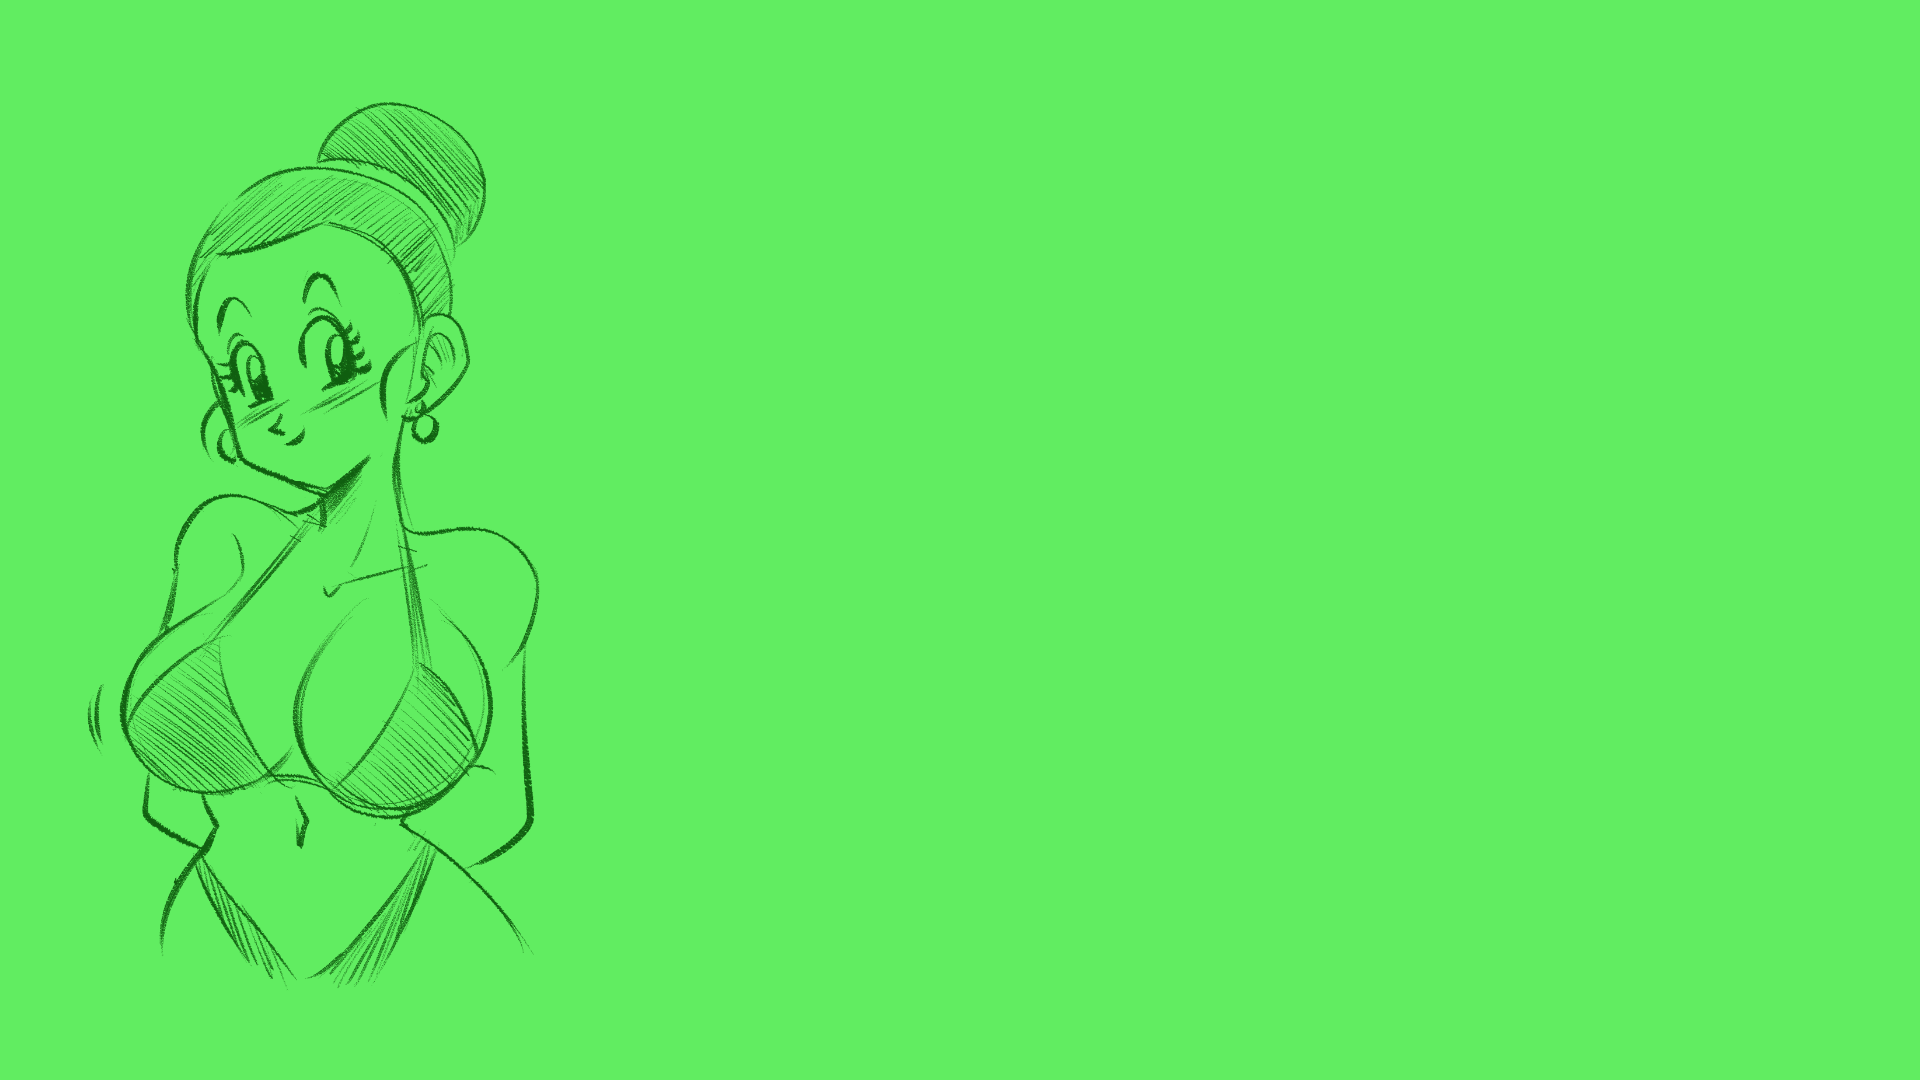 Anime 1920x1080 Chi-Chi Dragon Ball Dragon Ball Z hairbun minimalism sketches bikini boobs big boobs anime girls earring bare shoulders belly button blushing arm(s) behind back smiling hips wide hips straps bra straps monochrome green background simple background